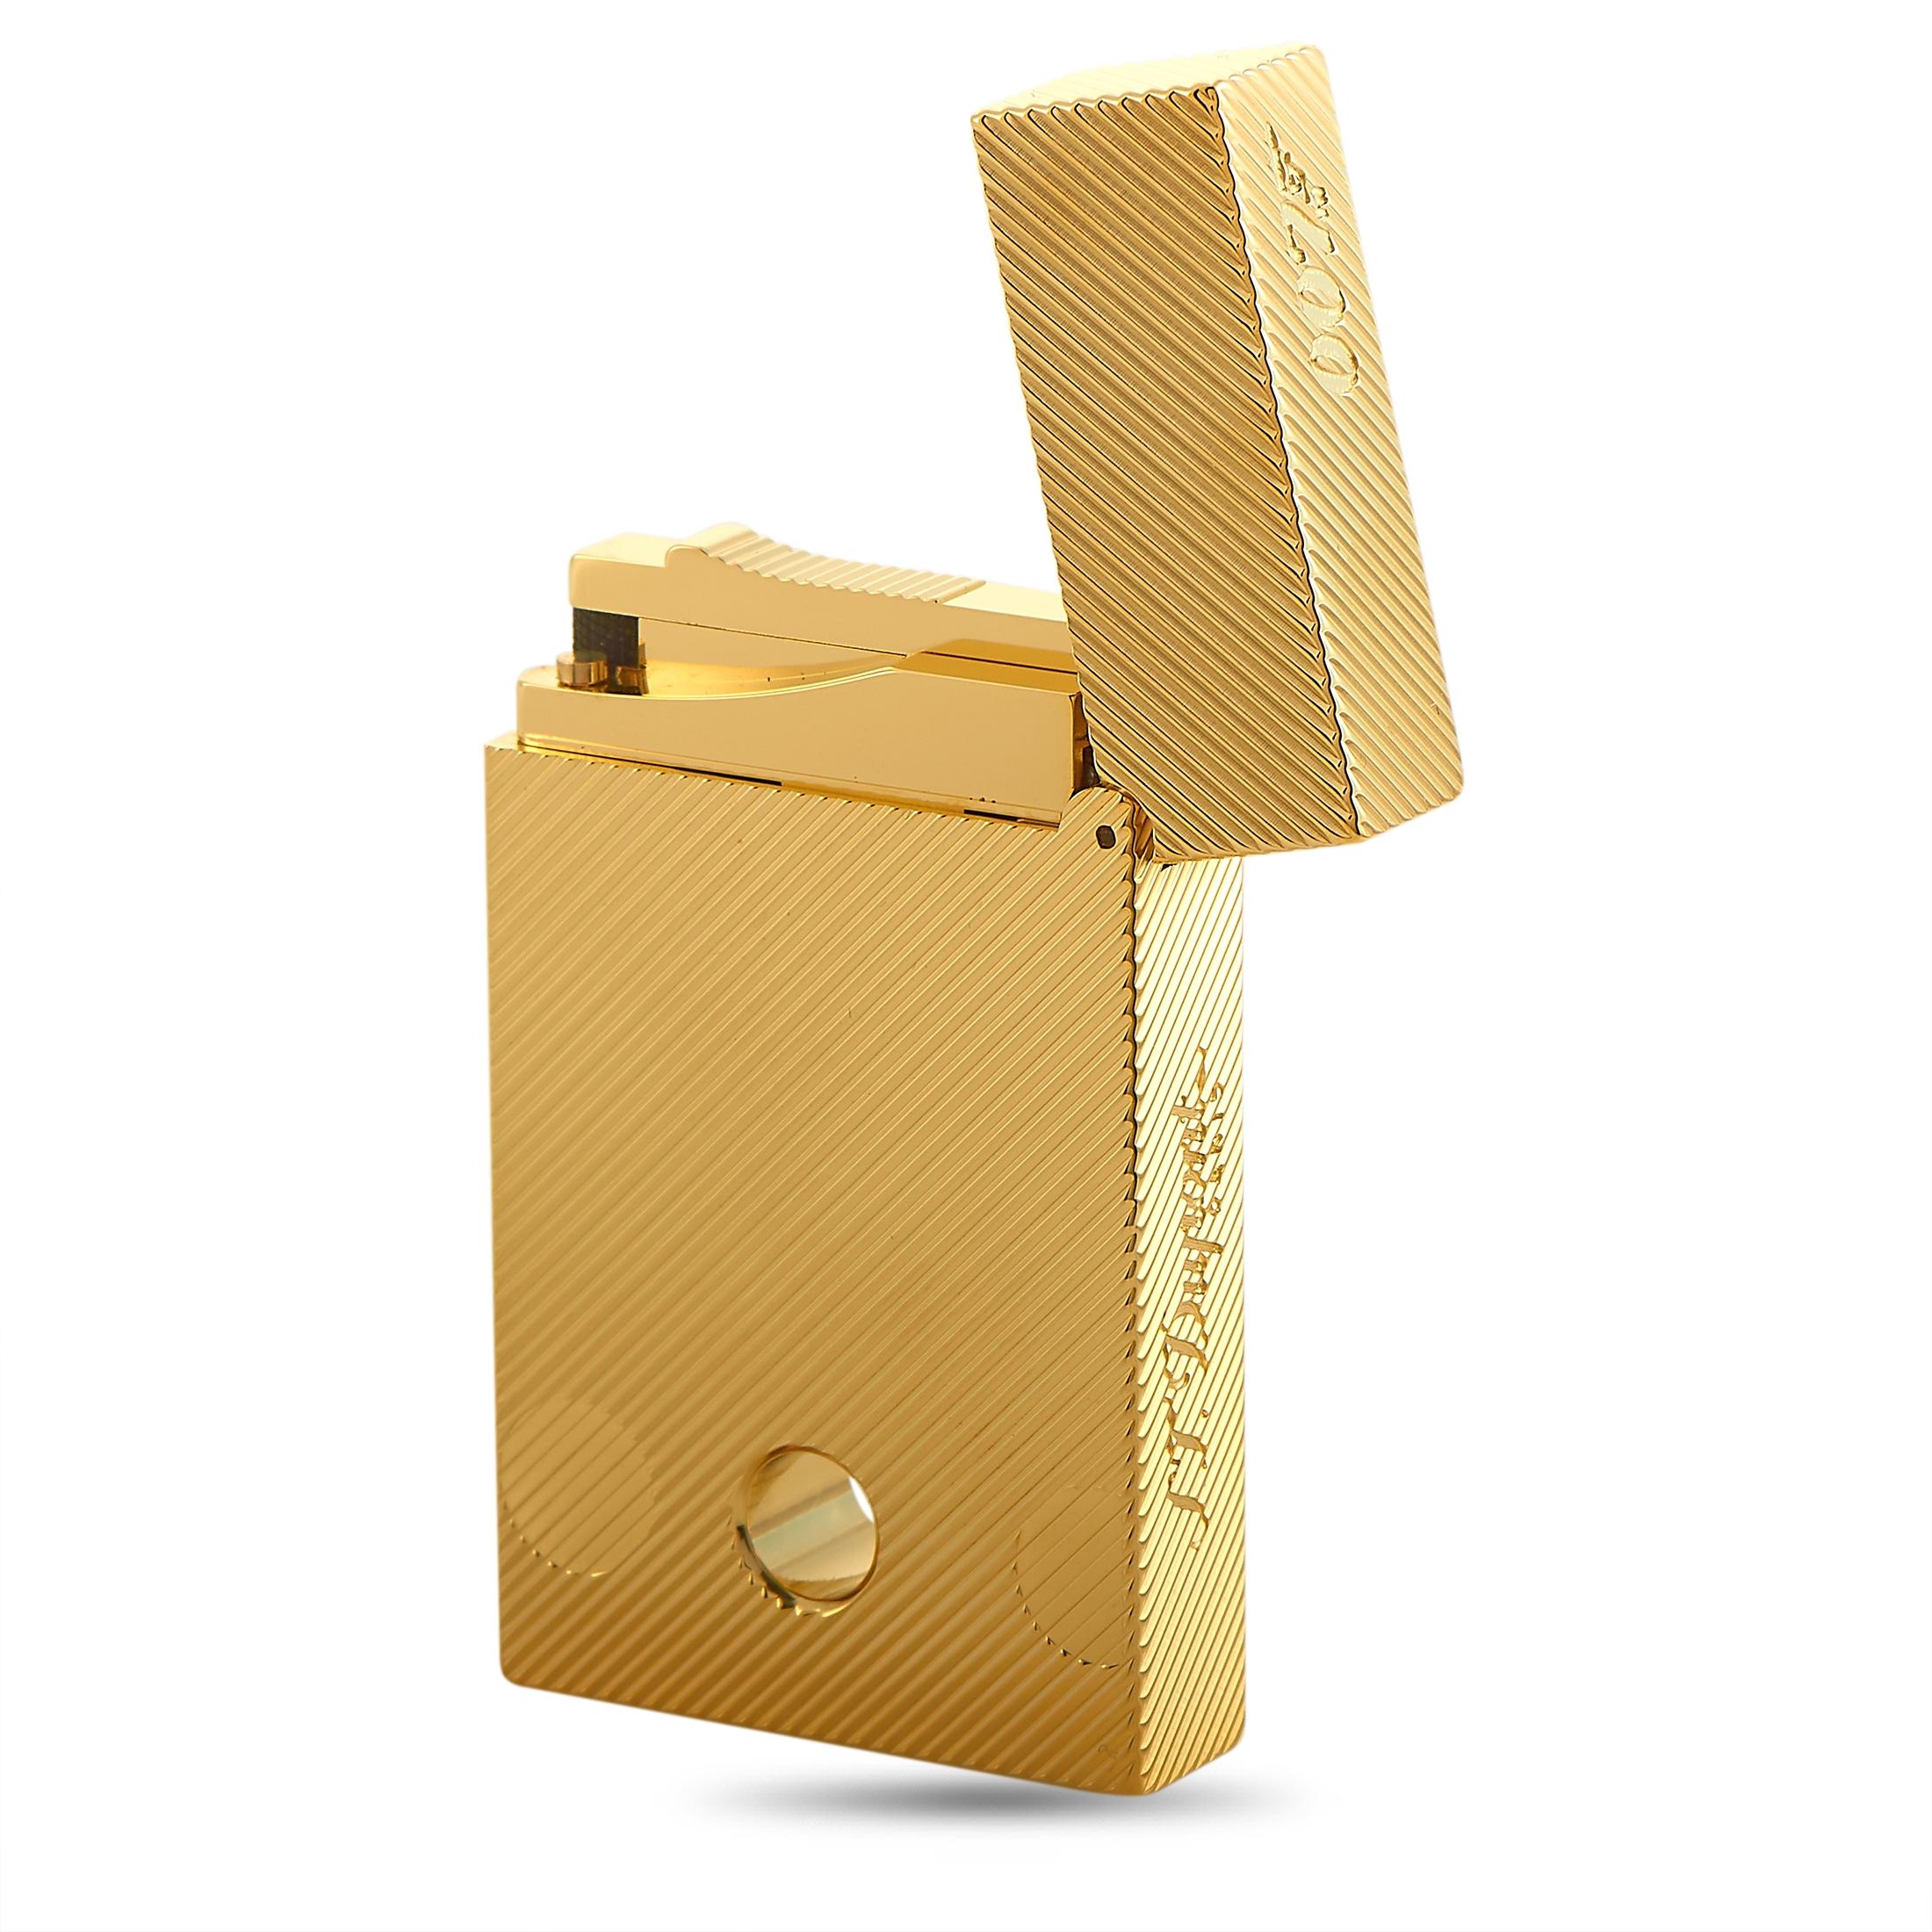 This S.T. Dupont lighter from the “Ligne 2” collection is created as an homage to the iconic fictional British agent James Bond, and its design is based on the famous 007 logo. The lighter weighs 120 grams and measures 3.70 by 6.20 by 1.10 cm. It is